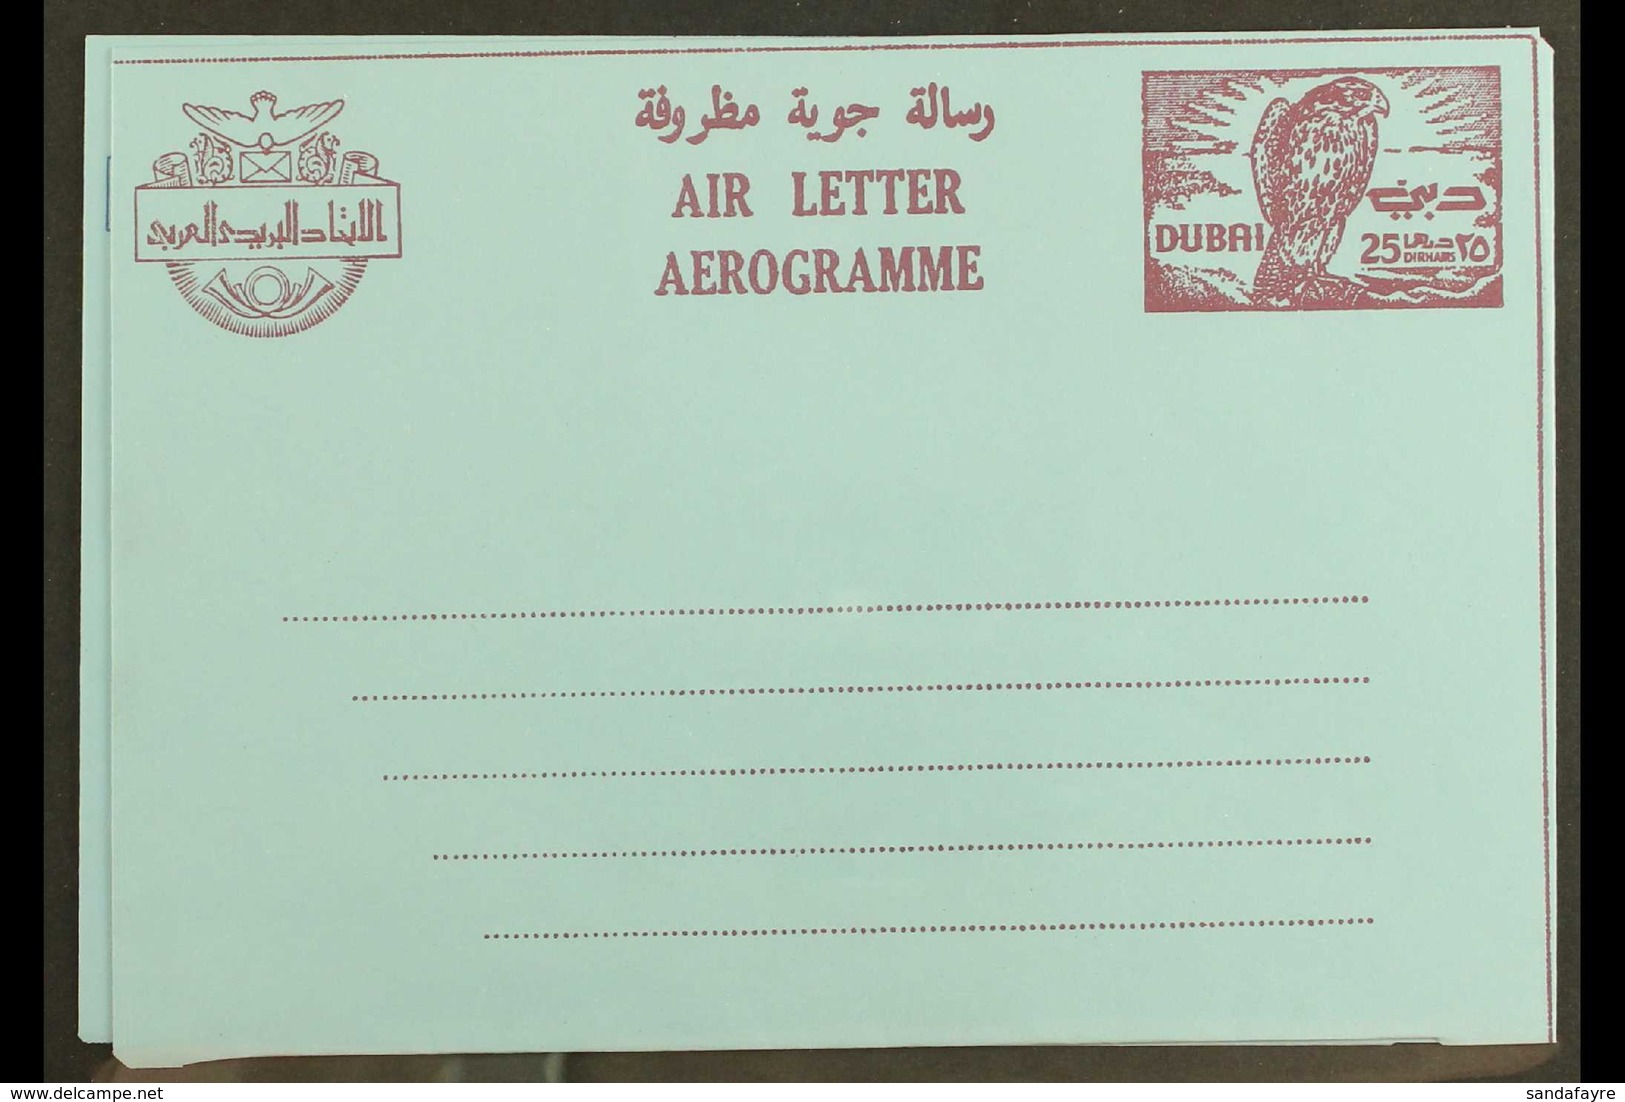 AIRLETTER 1971 COLOUR TRIAL 25d Hawk, Printed In Red On Blue (issued In Dark Blue On Blue Paper), As Kessler K18, Very F - Dubai